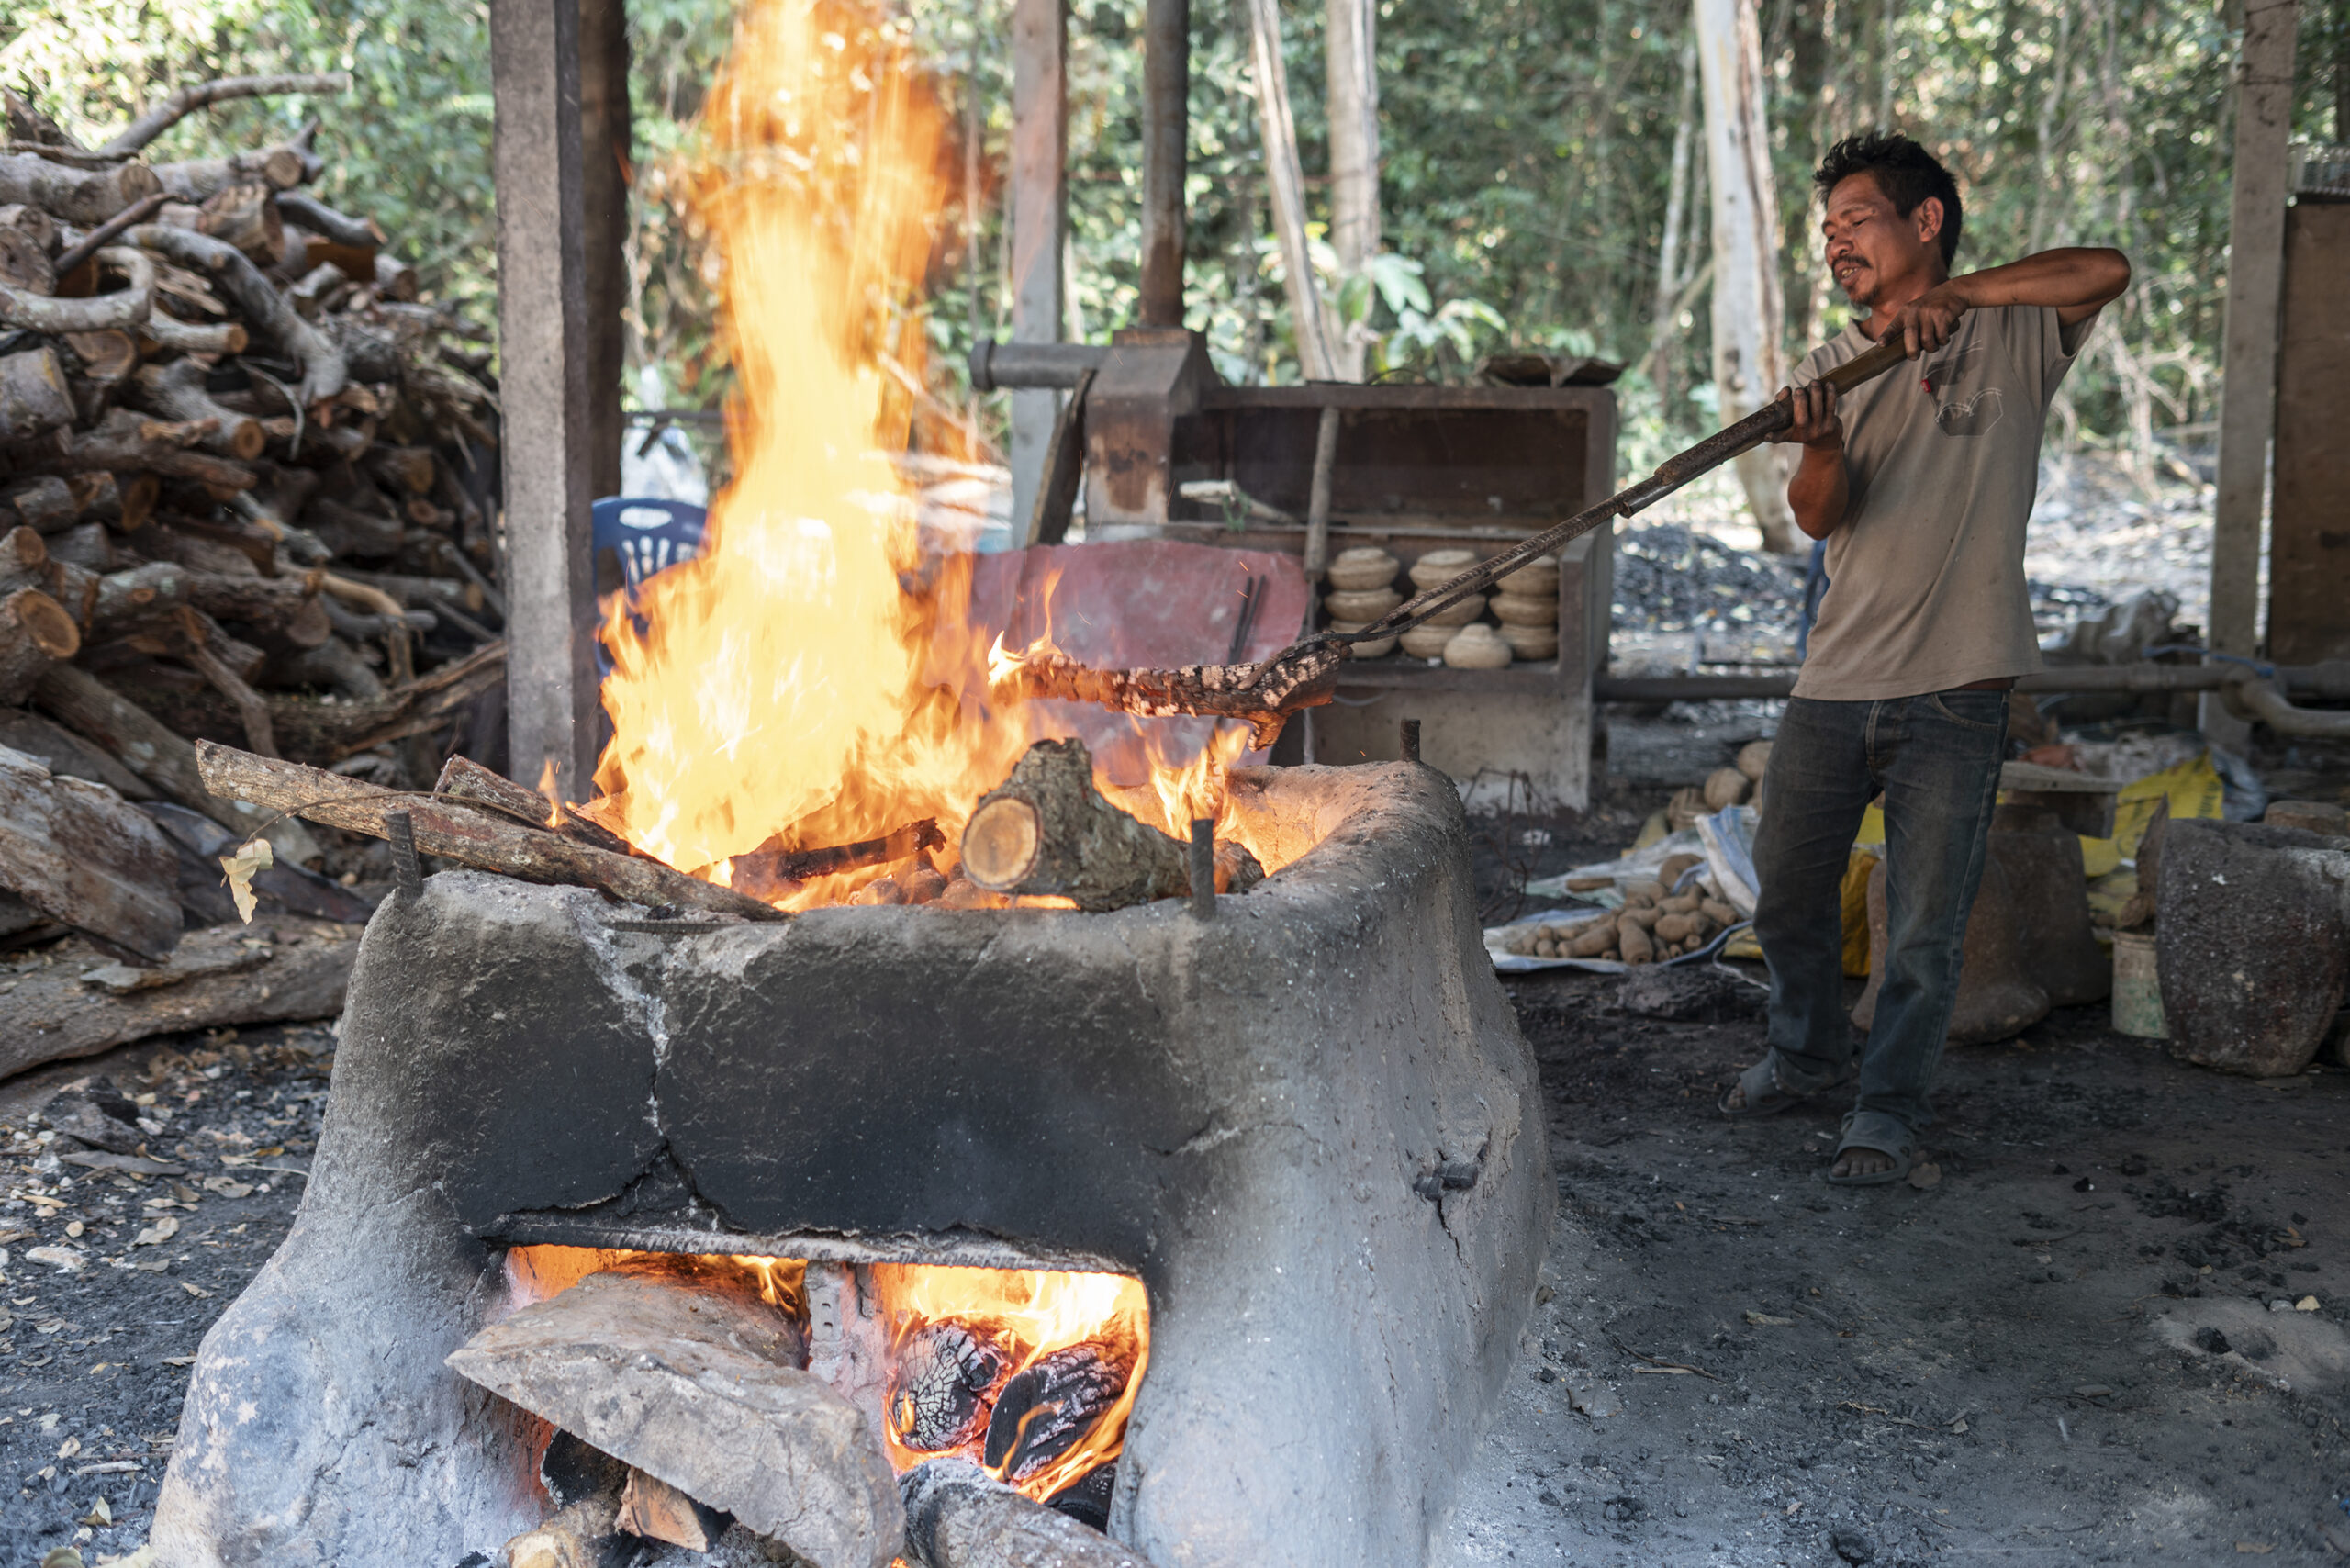 A man stokes the fire he is using to heat up brass casting molds.